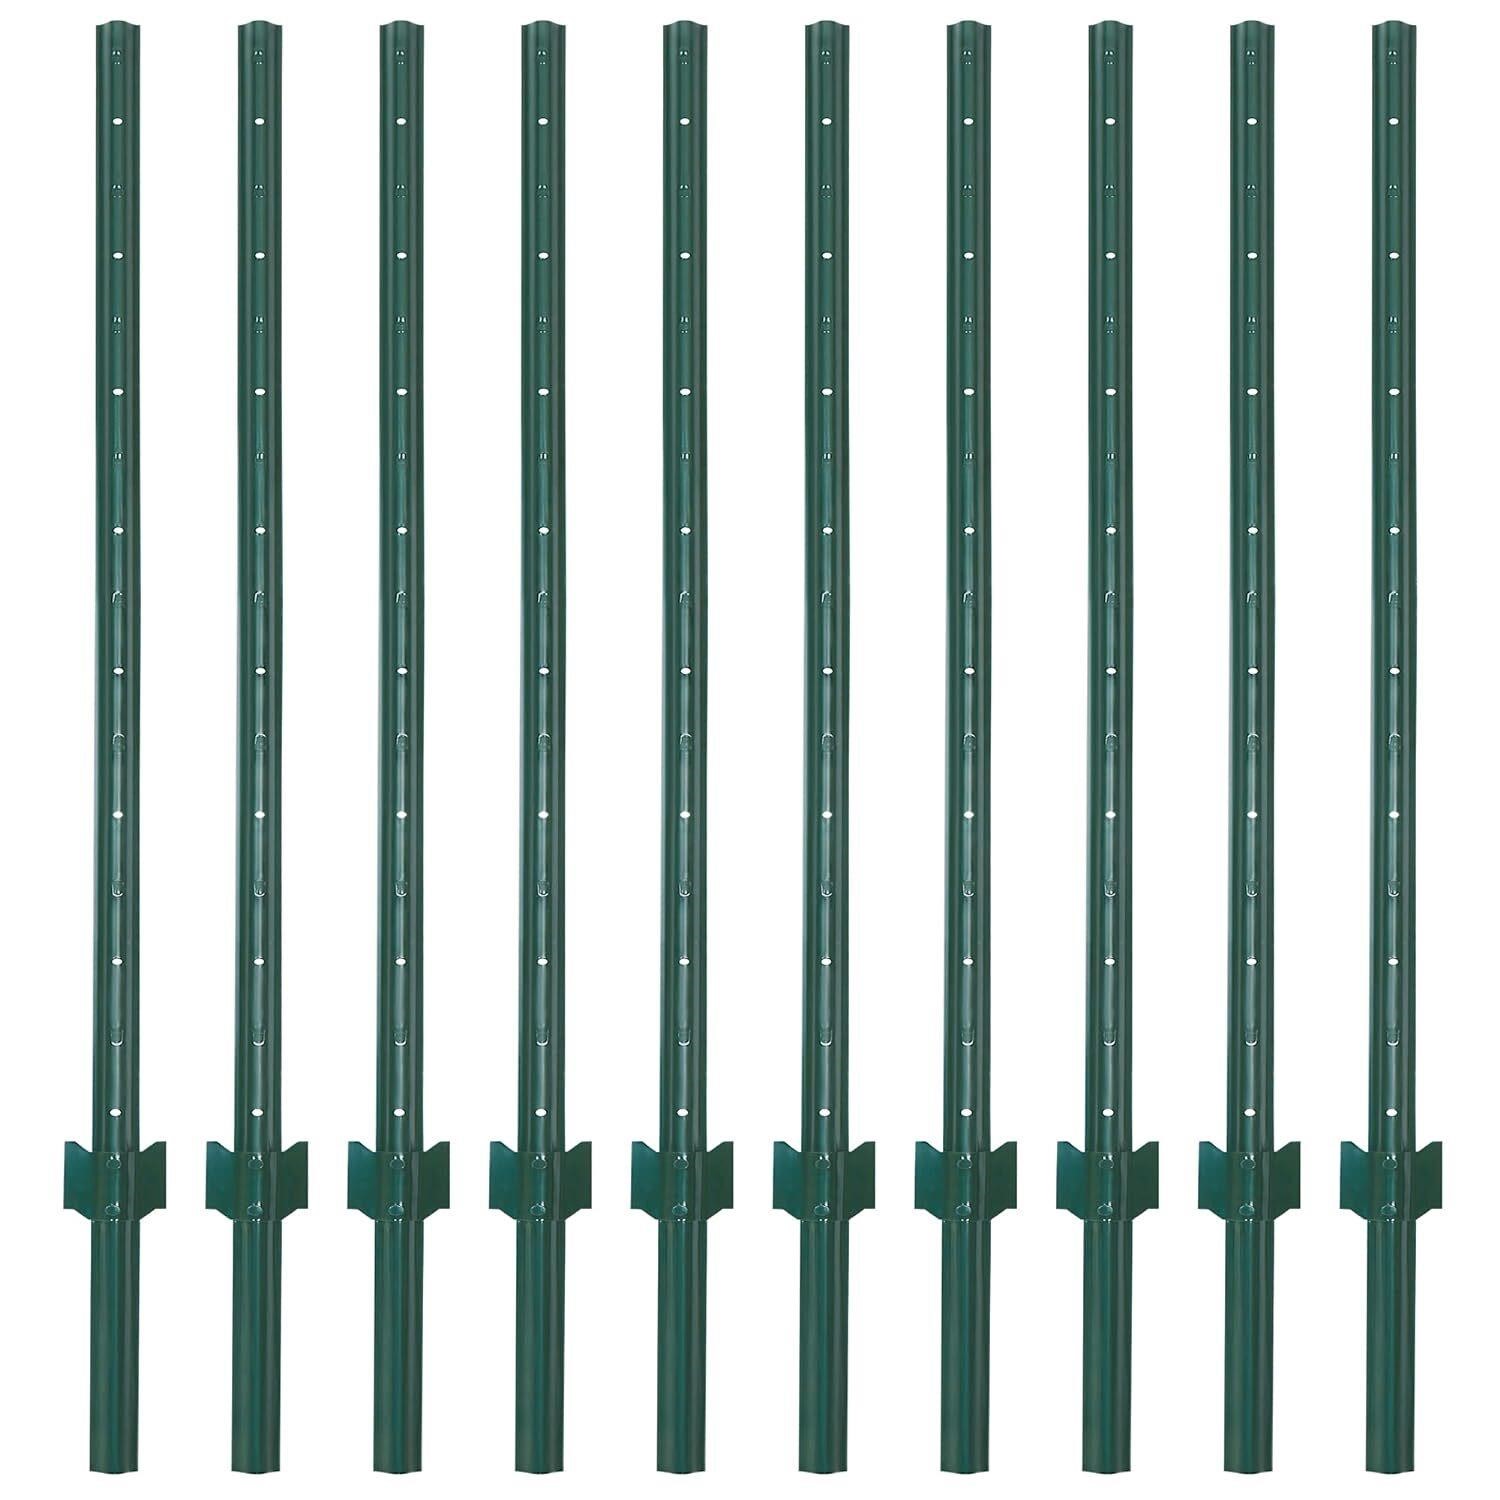 LADECH 6ft Sturdy Metal Fence Post - 10 Pack